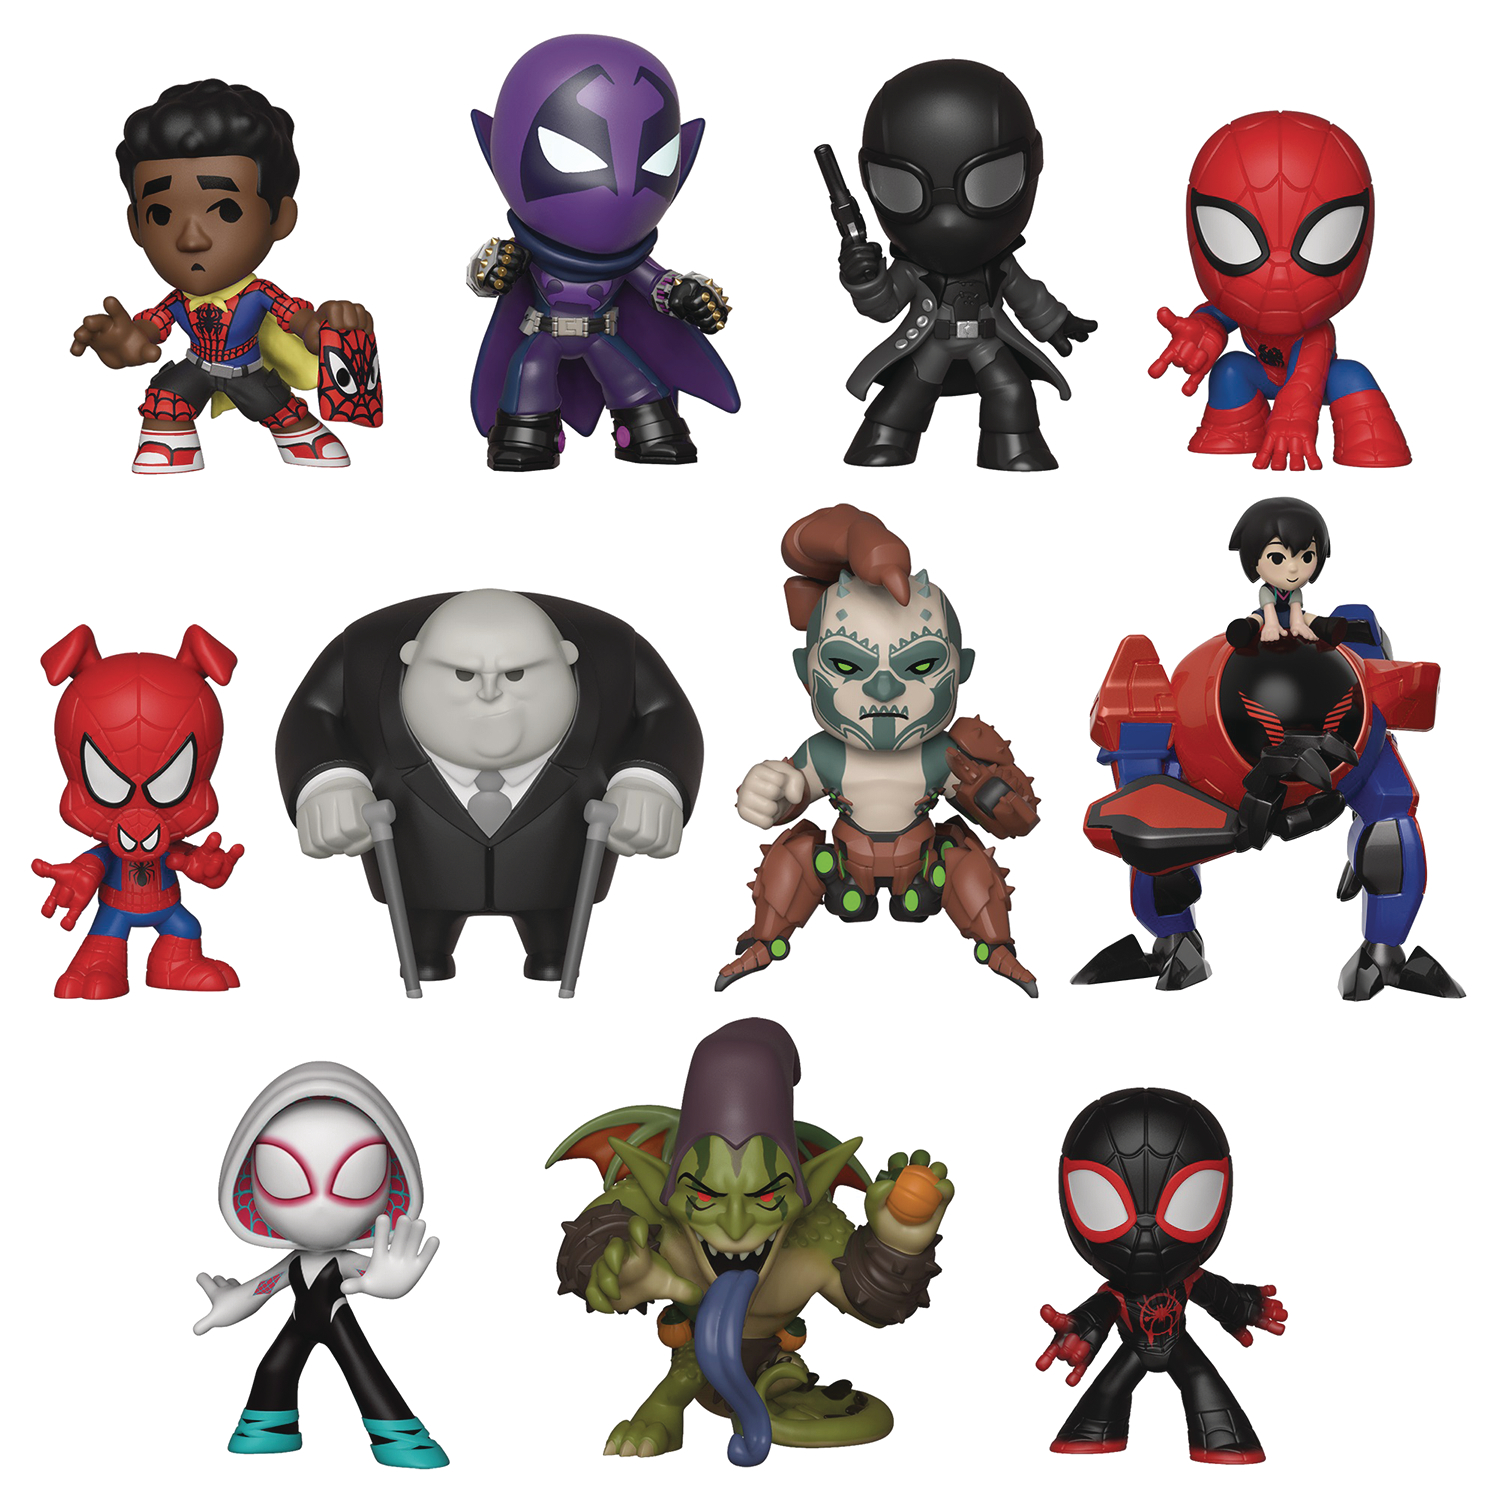 AUG188698 - MYSTERY MINIS ANIMATED SPIDER-MAN 12PC BMB DISP - Previews World